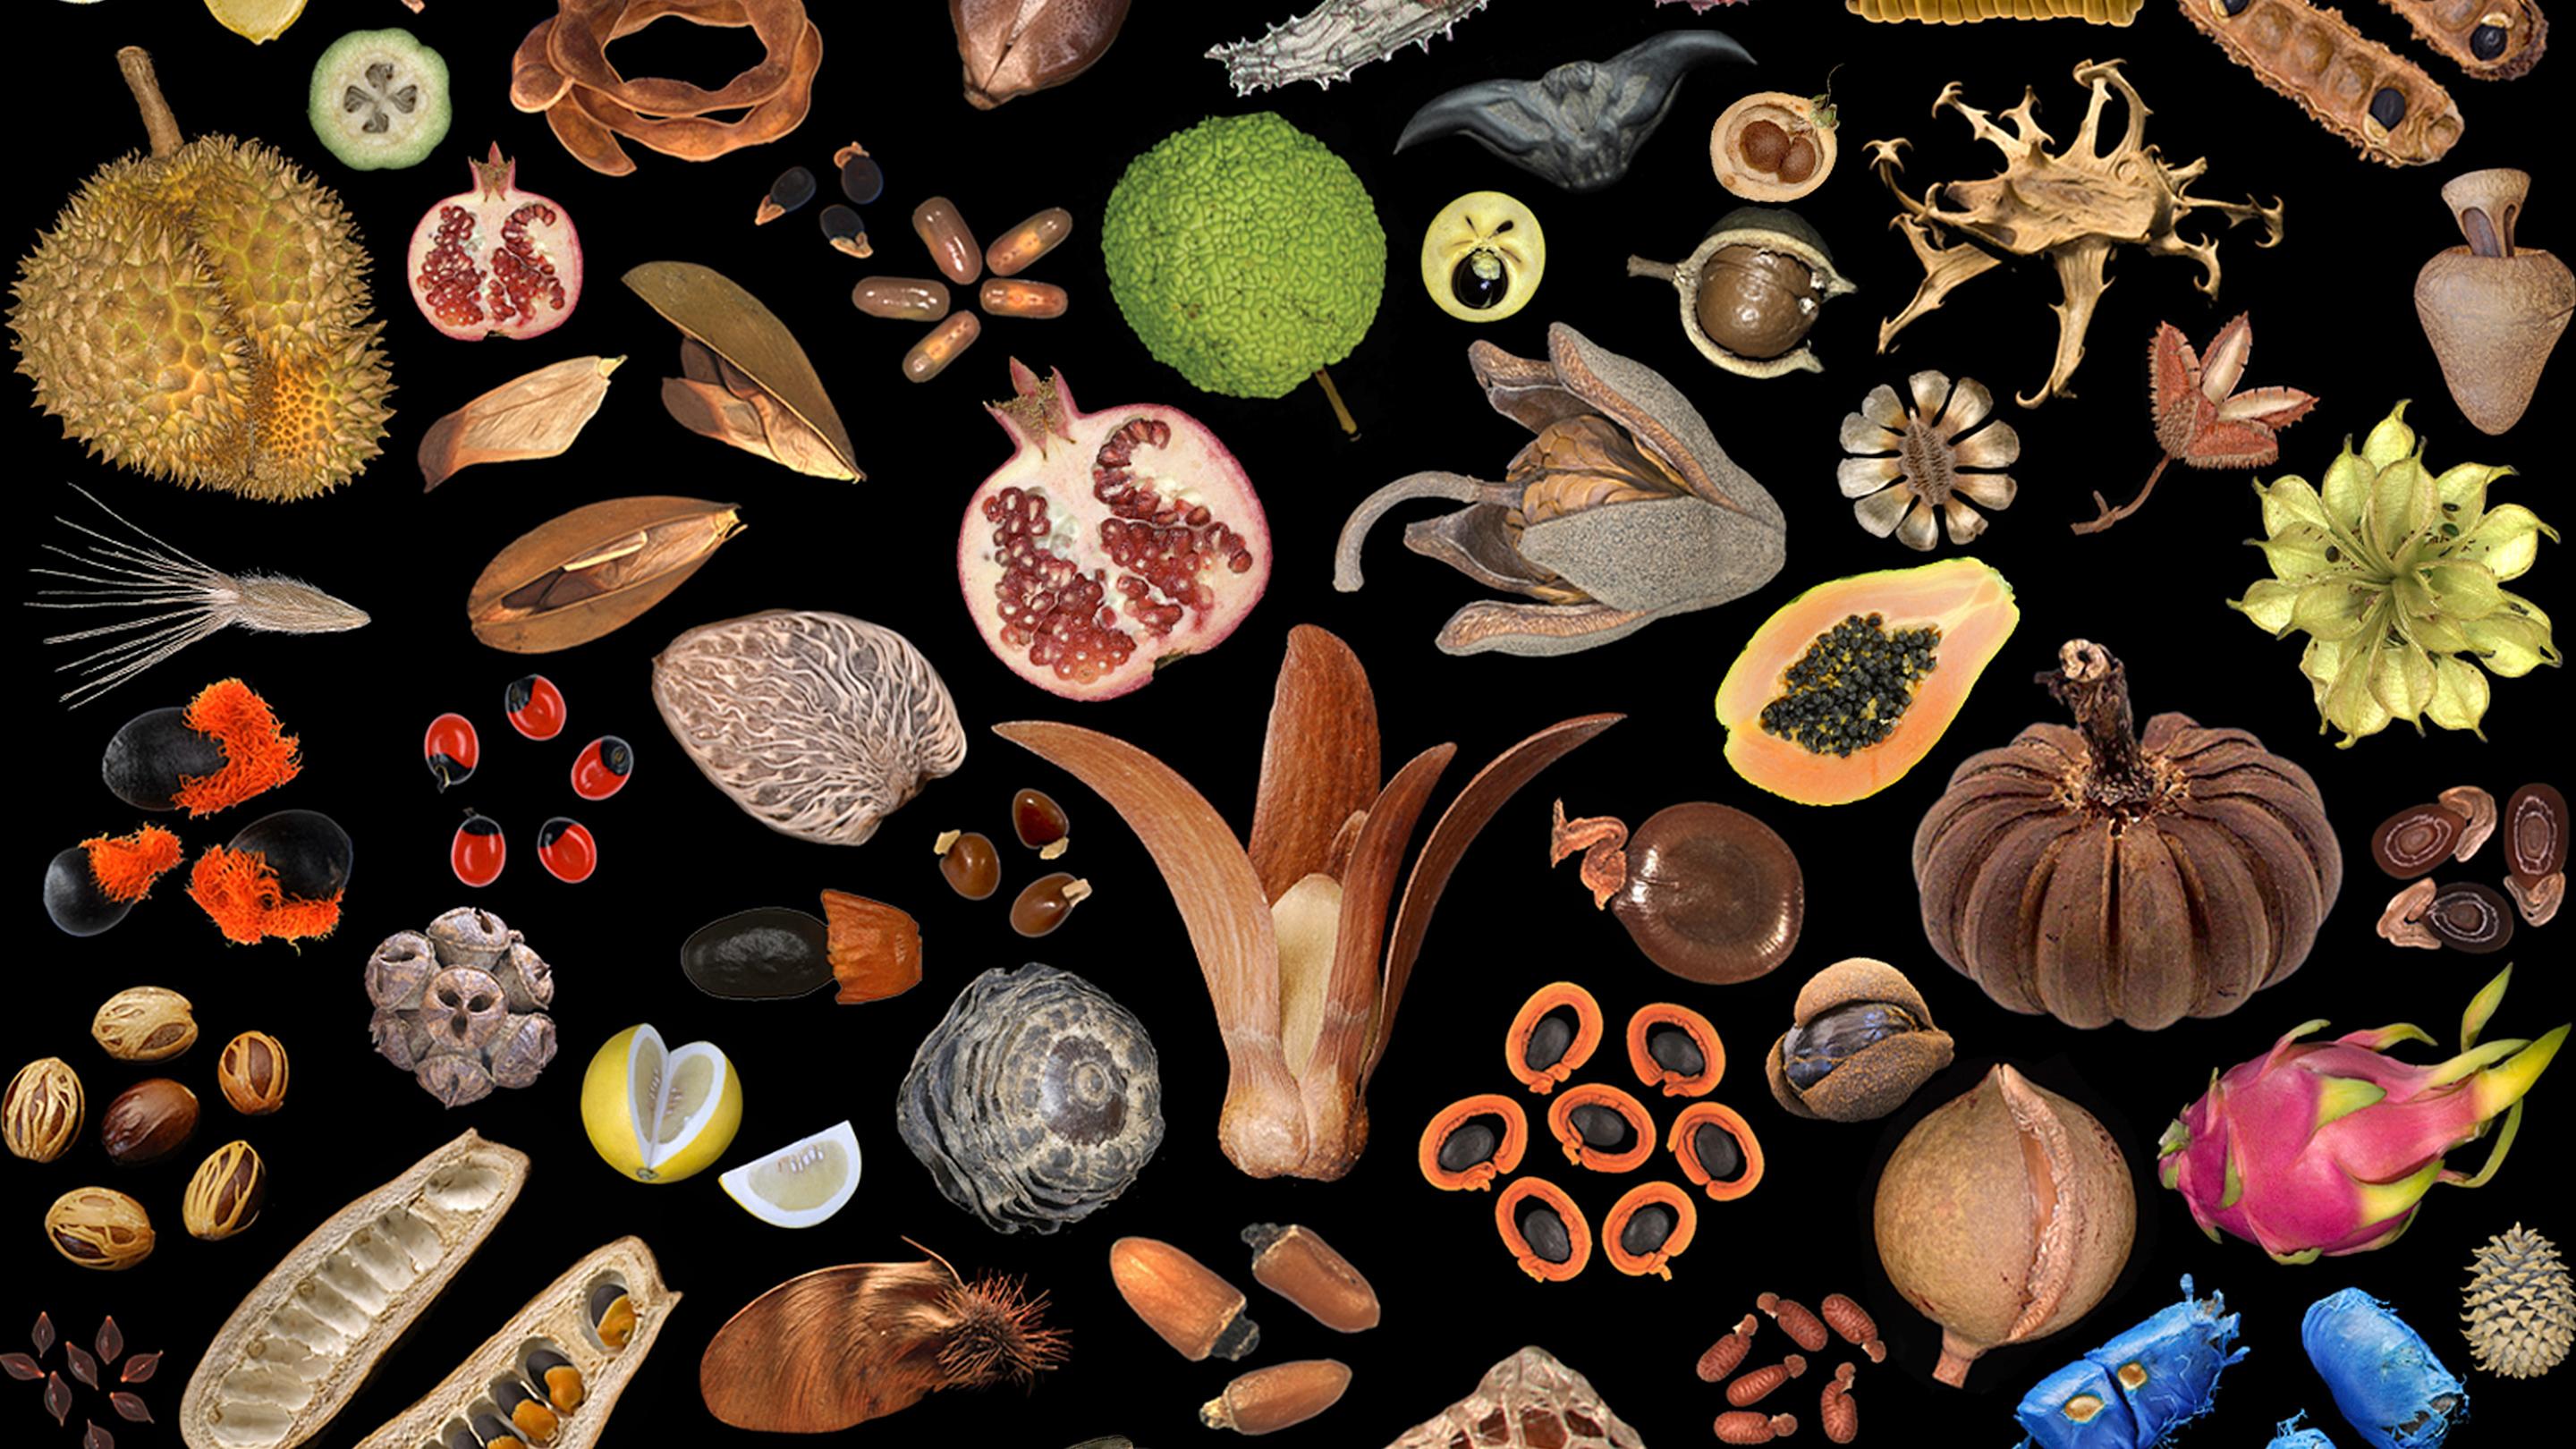 An artist display of seeds and fruit against a black background